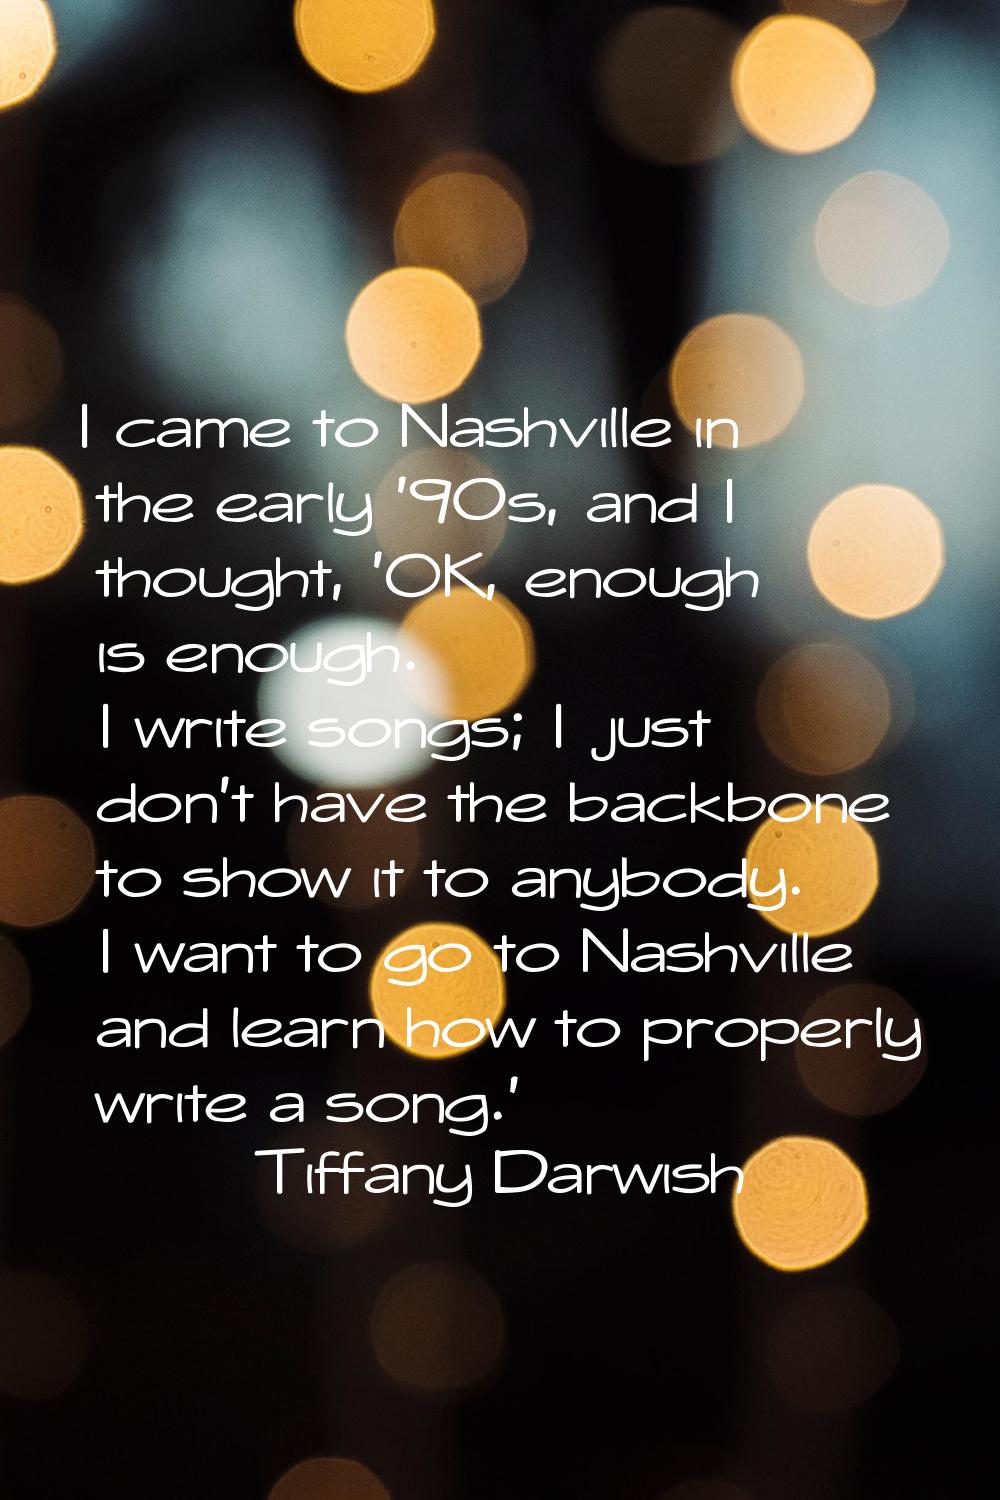 I came to Nashville in the early '90s, and I thought, 'OK, enough is enough. I write songs; I just 